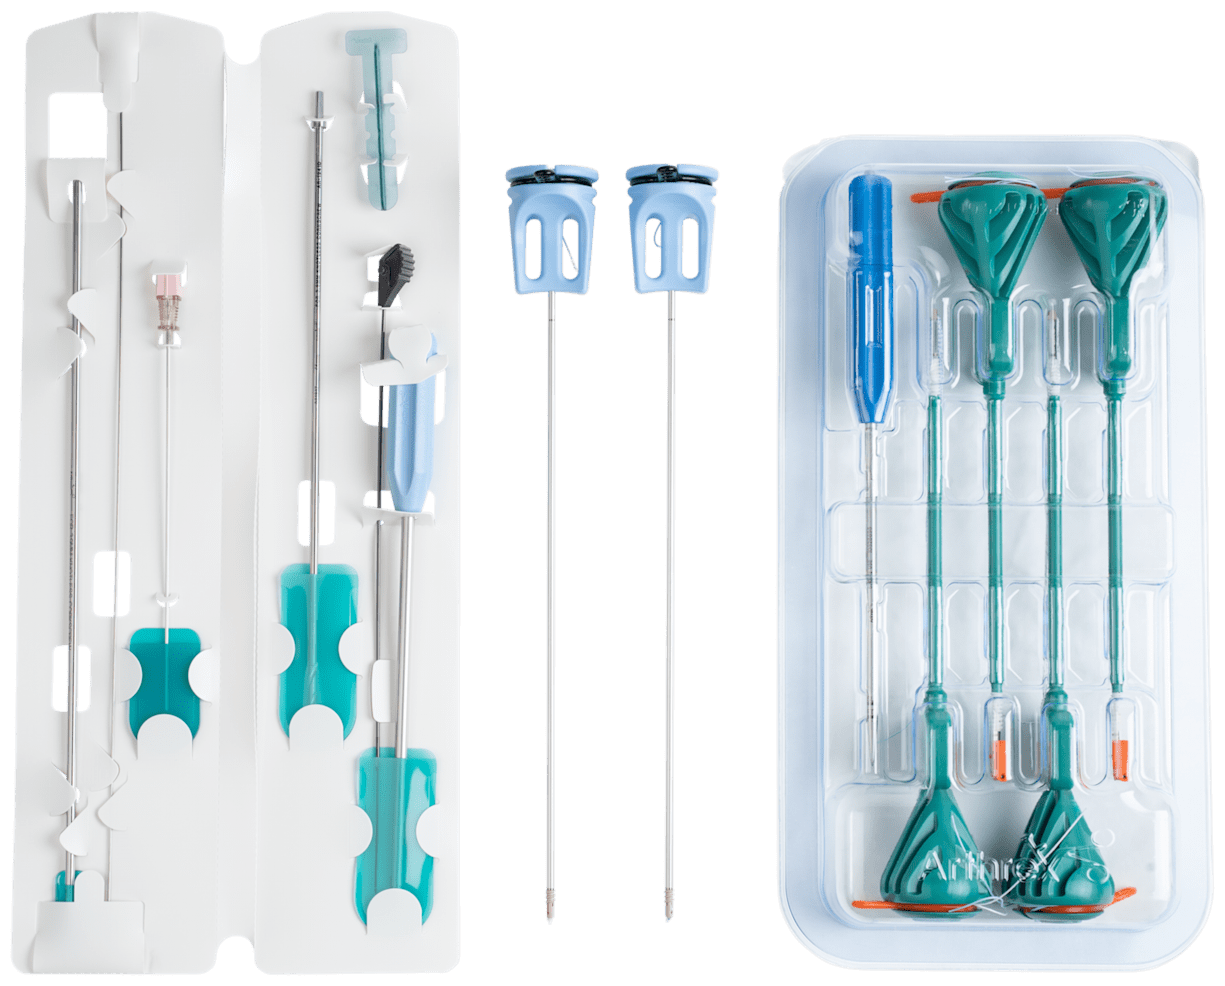 SCR Implant System Includes: Two 4.75 mm SwiveLock C Anchors w/1 Preloaded FiberTape Loop (Medial), two 4.75 SwiveLock C Anchors (Lateral), Disposable Punch, SCORPION-multifire Needle, two 3.9 PEEK Knotless Corkscrew Anchors, Disposable Fishmouth Spear, Drill, Portal Dilator, 17-ga Spinal Needle w/Stylet, Guide Pin, and PassPort Cannula Divider